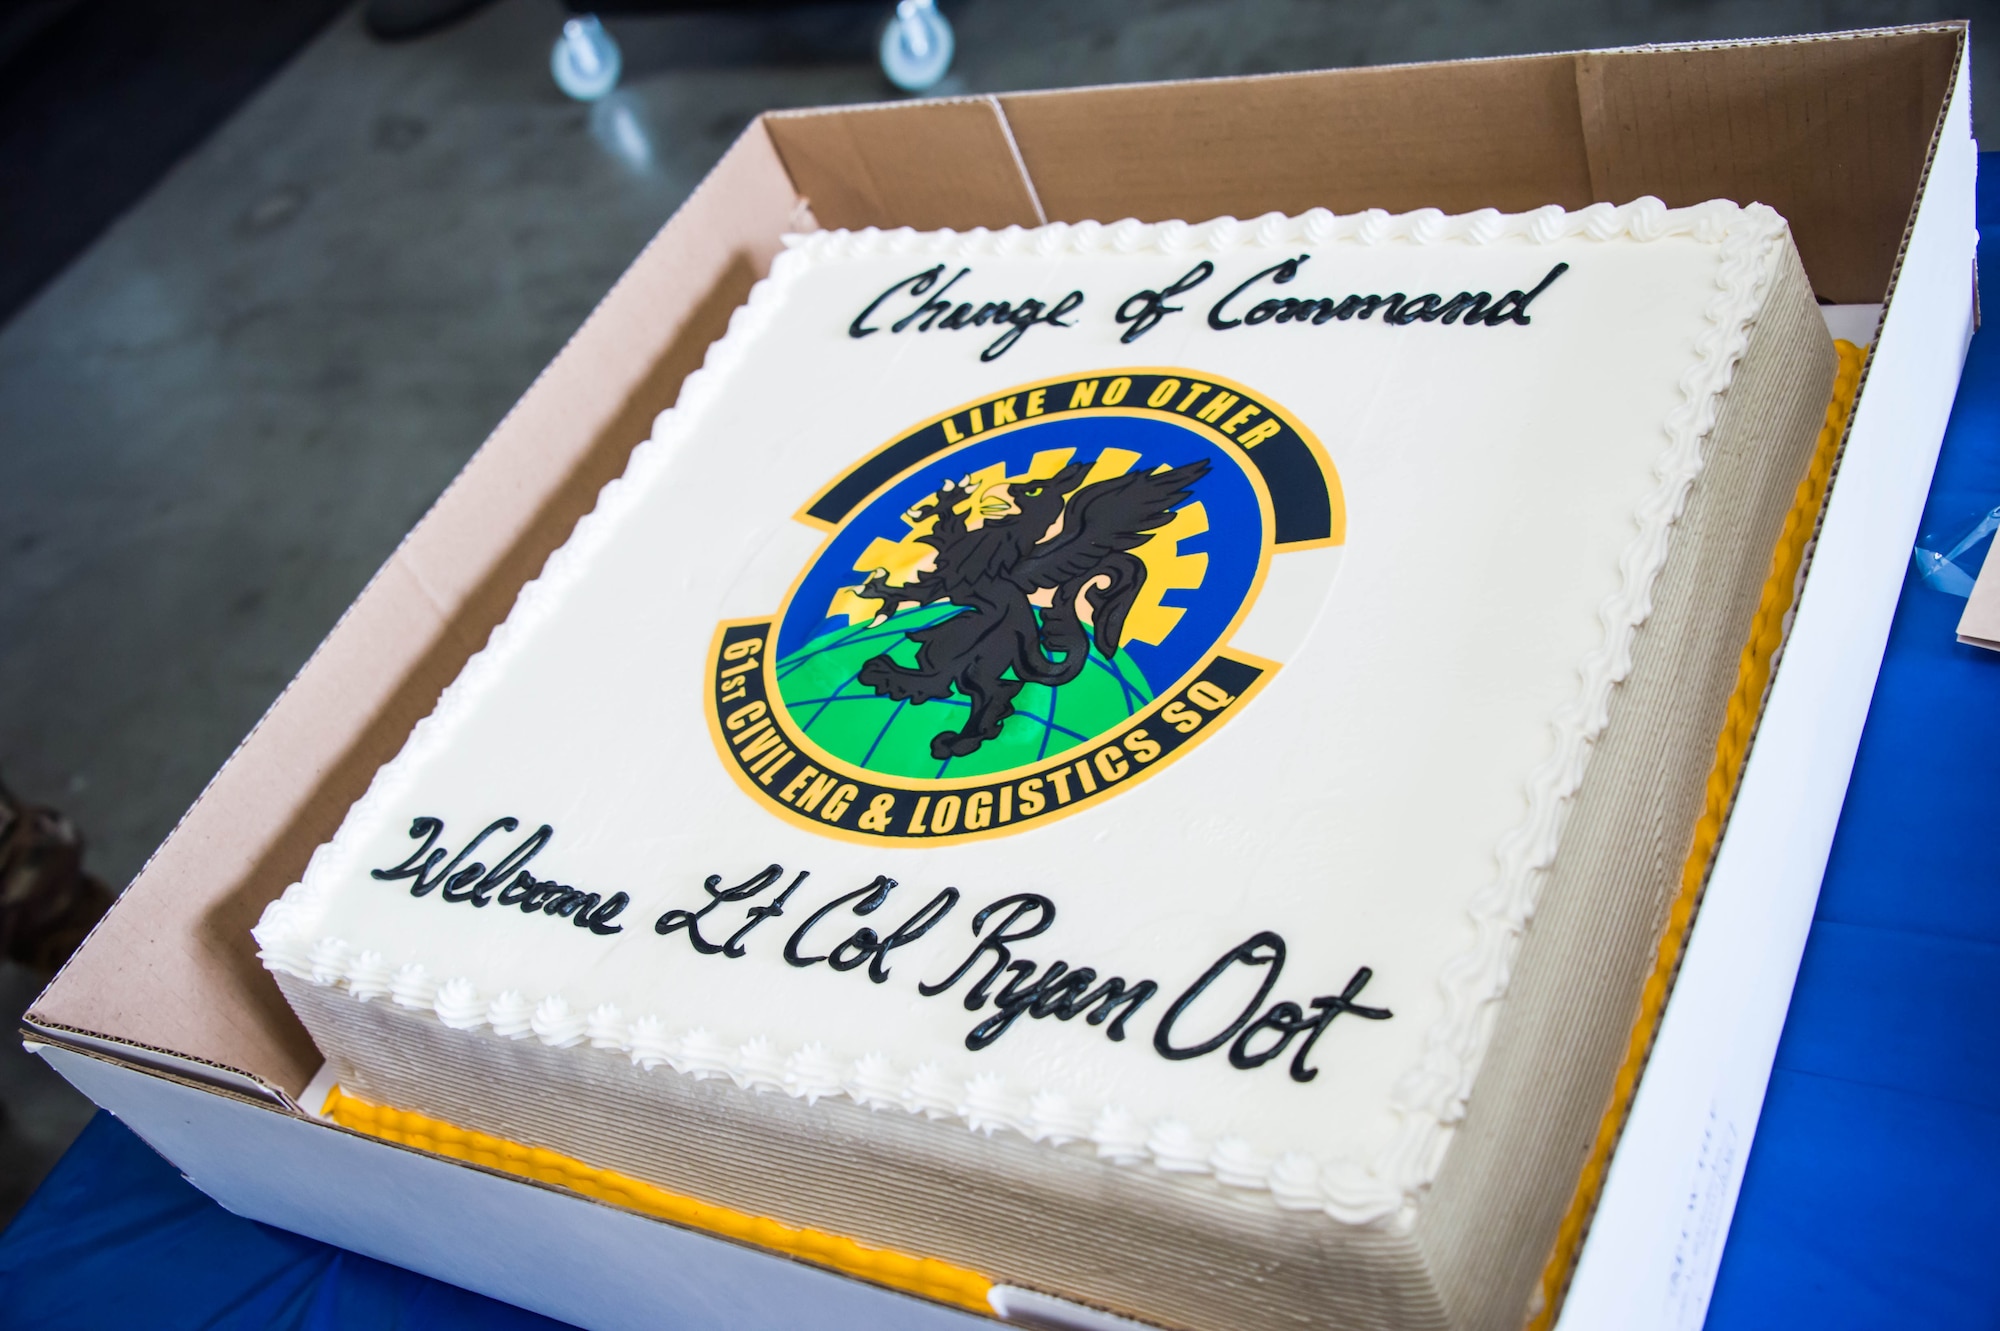 The ceremonial change of command cake welcomes the new 61st CELS commander Lt. Col. Ryan Oot to the unit at his change of command ceremony which was held in their warehouse on Monday